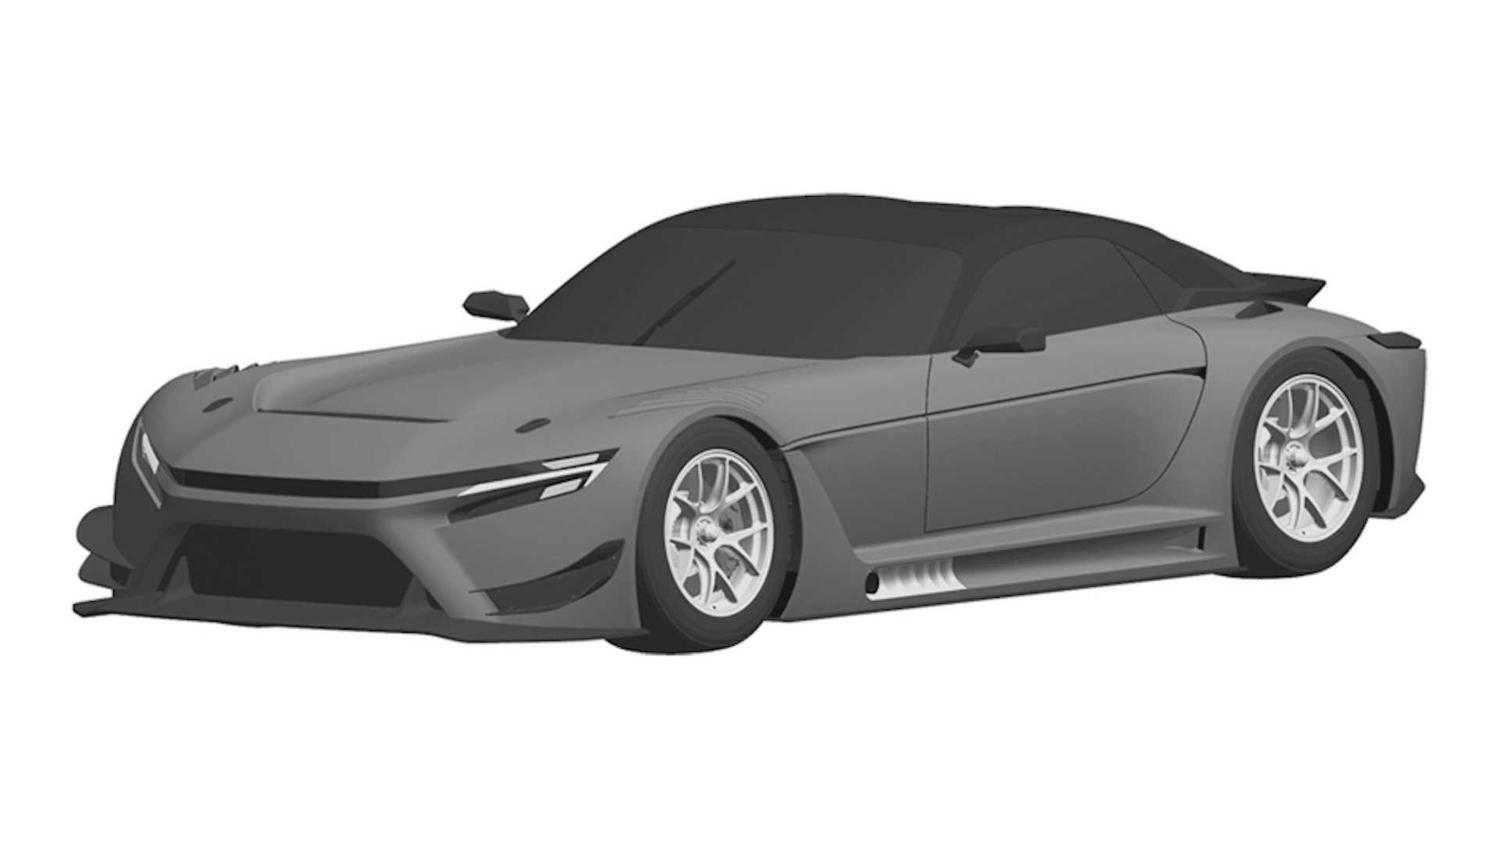 Is A Road-Going Toyota GR GT3 Concept In The Works?